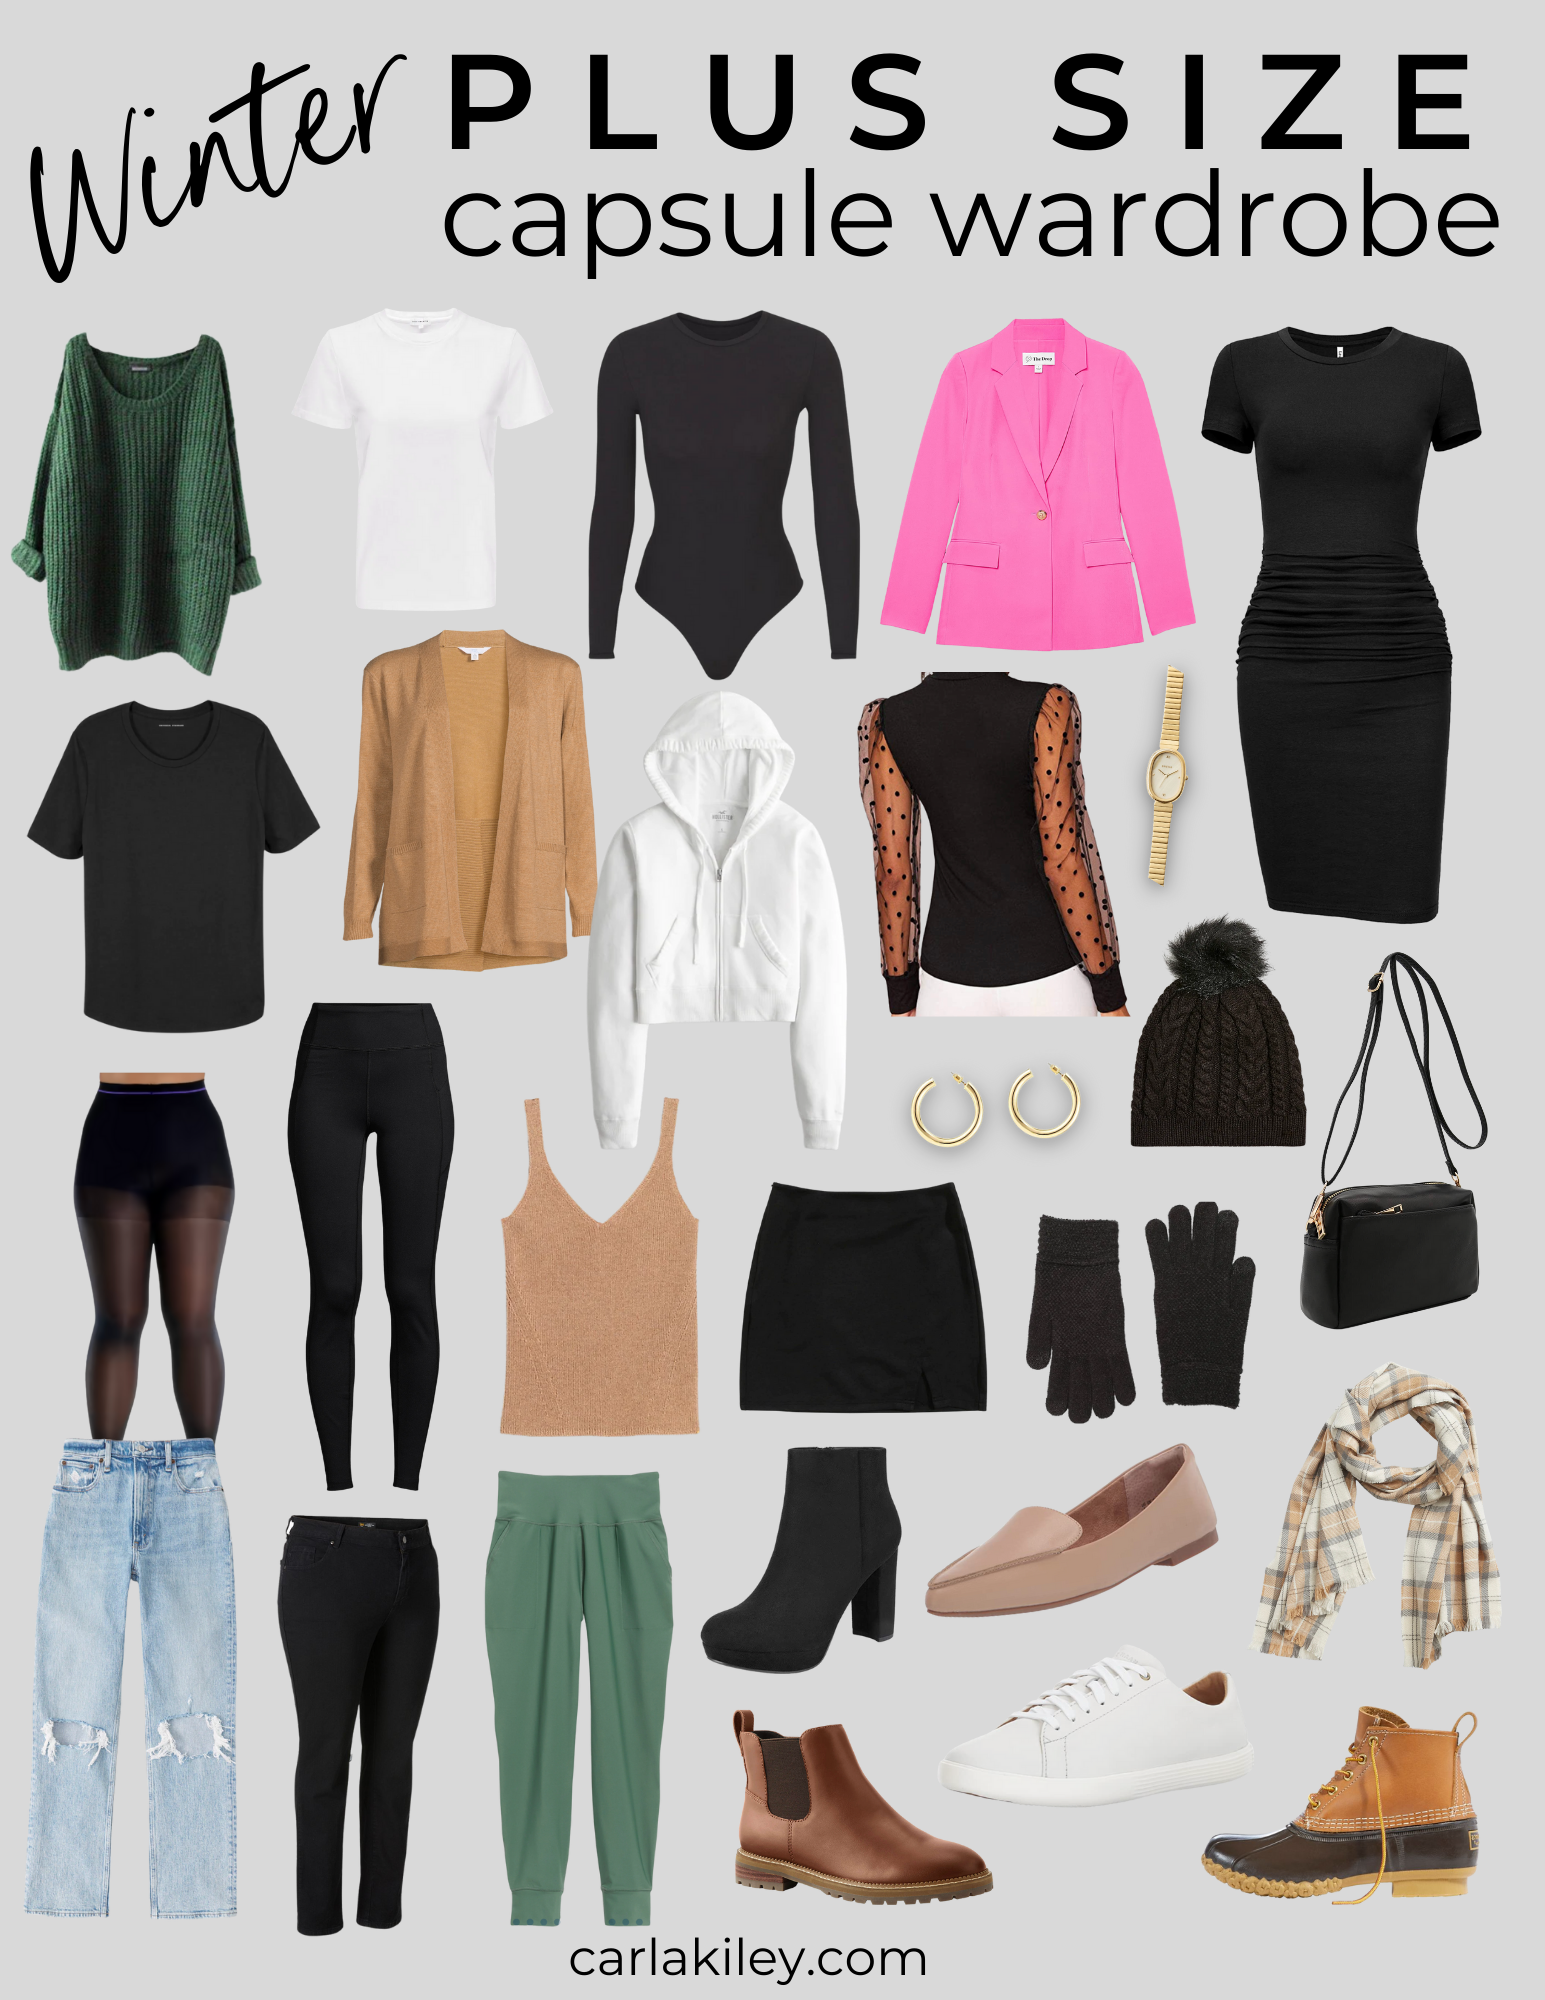 WATCH: What's a Capsule Wardrobe? And, How Do You Build One